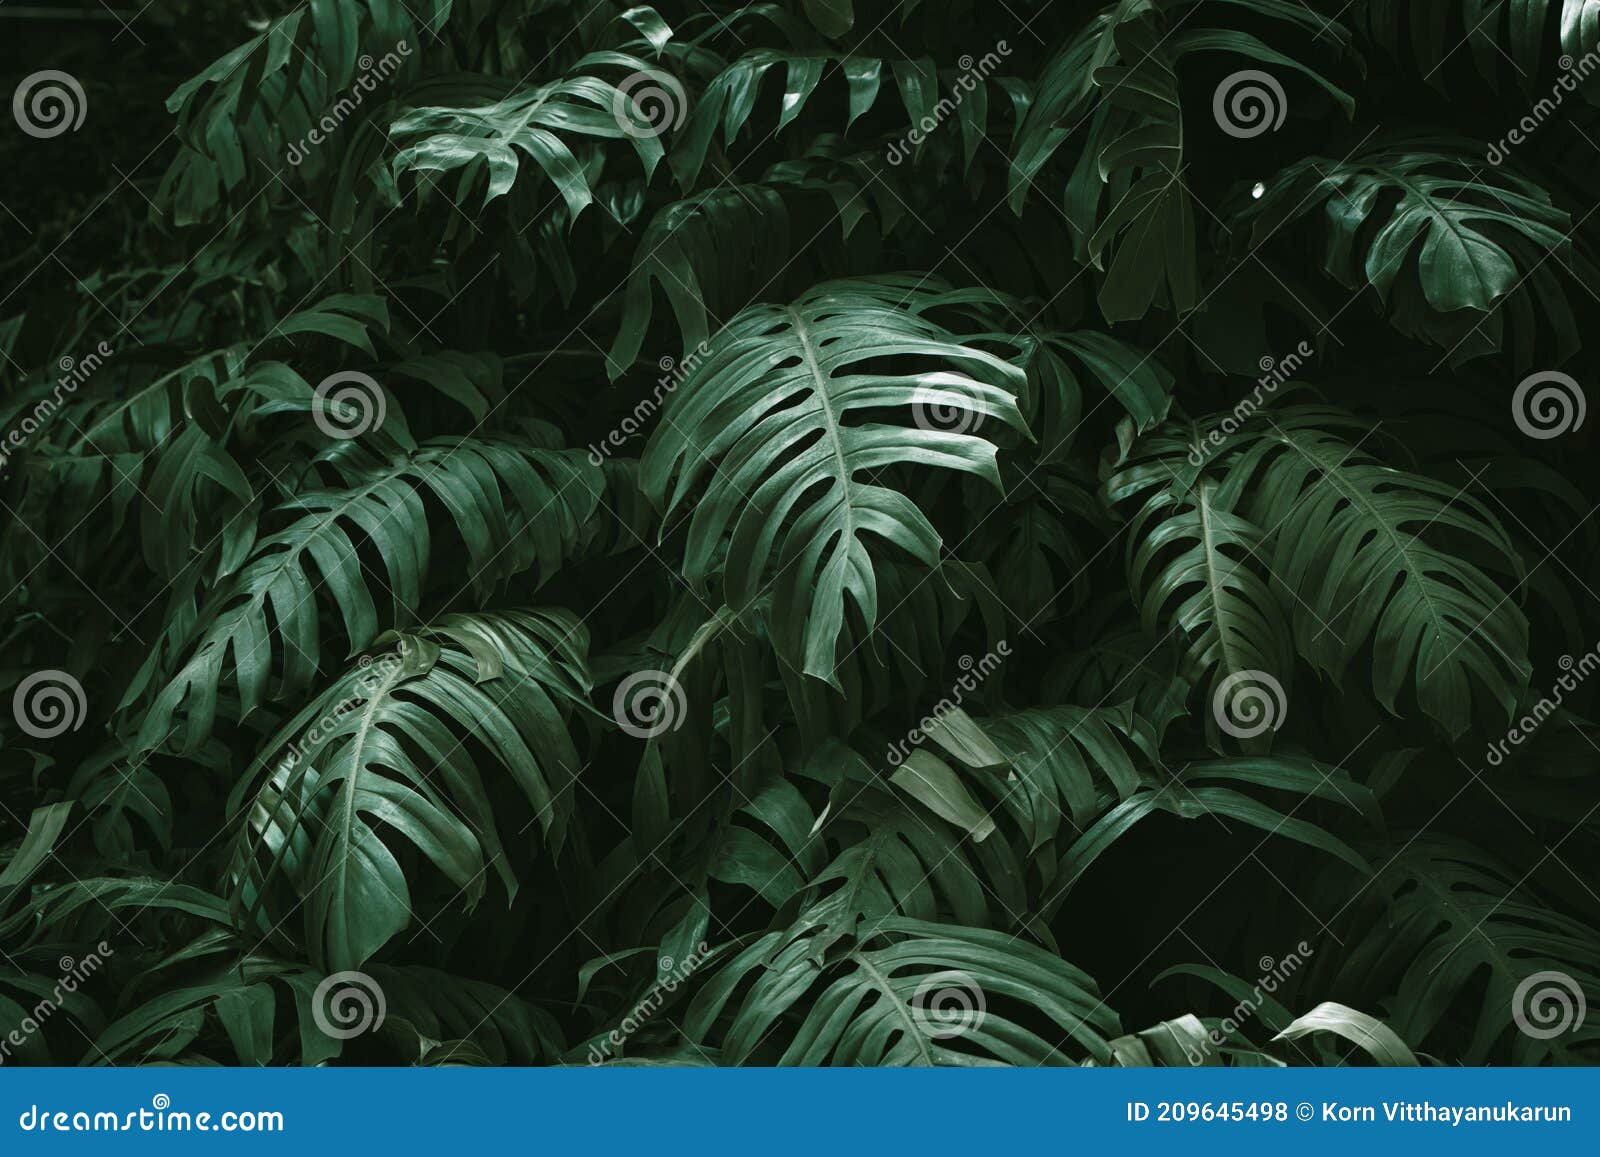 Tropical Rainforest Green Leaves of Monstera Philodendron Nature Plant  Image for Home Decoration Background Wallpaper Stock Photo - Image of deep,  dark: 209645498